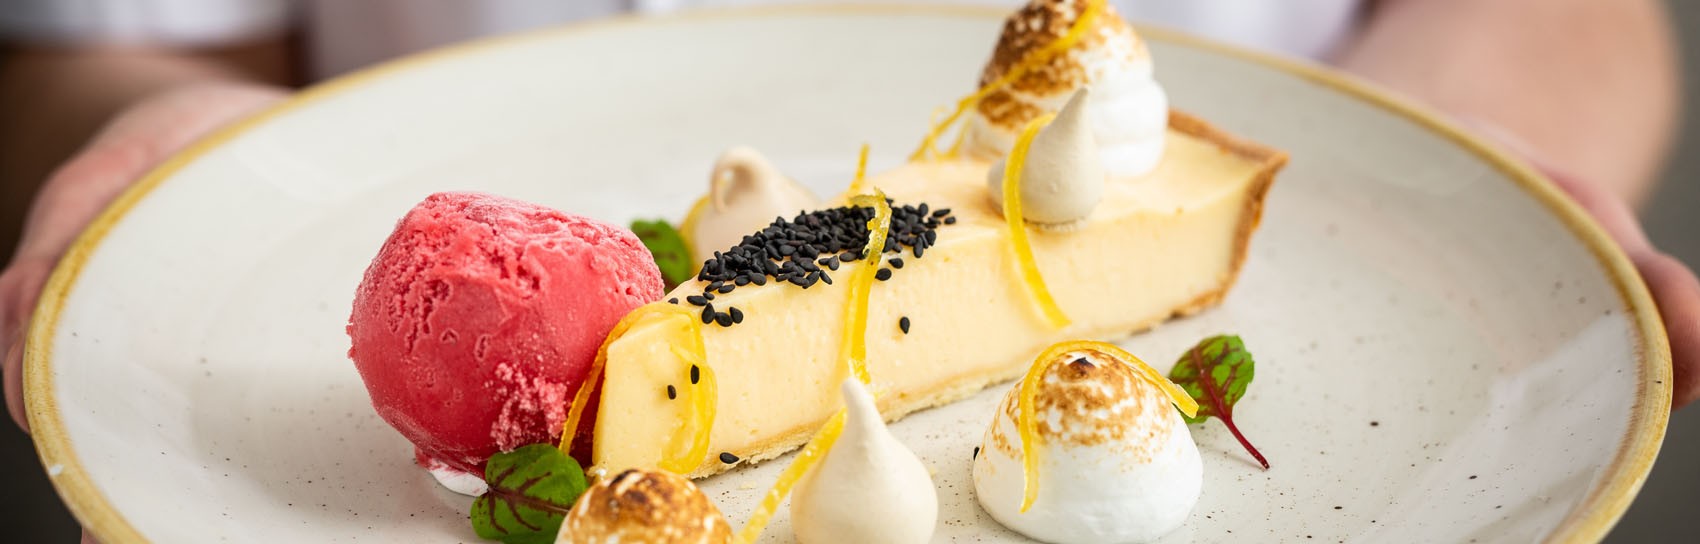 Dessert at the Budock Vean Hotel. Photograph by BUDOCK VEAN HOTEL & HOLIDAY HOMES